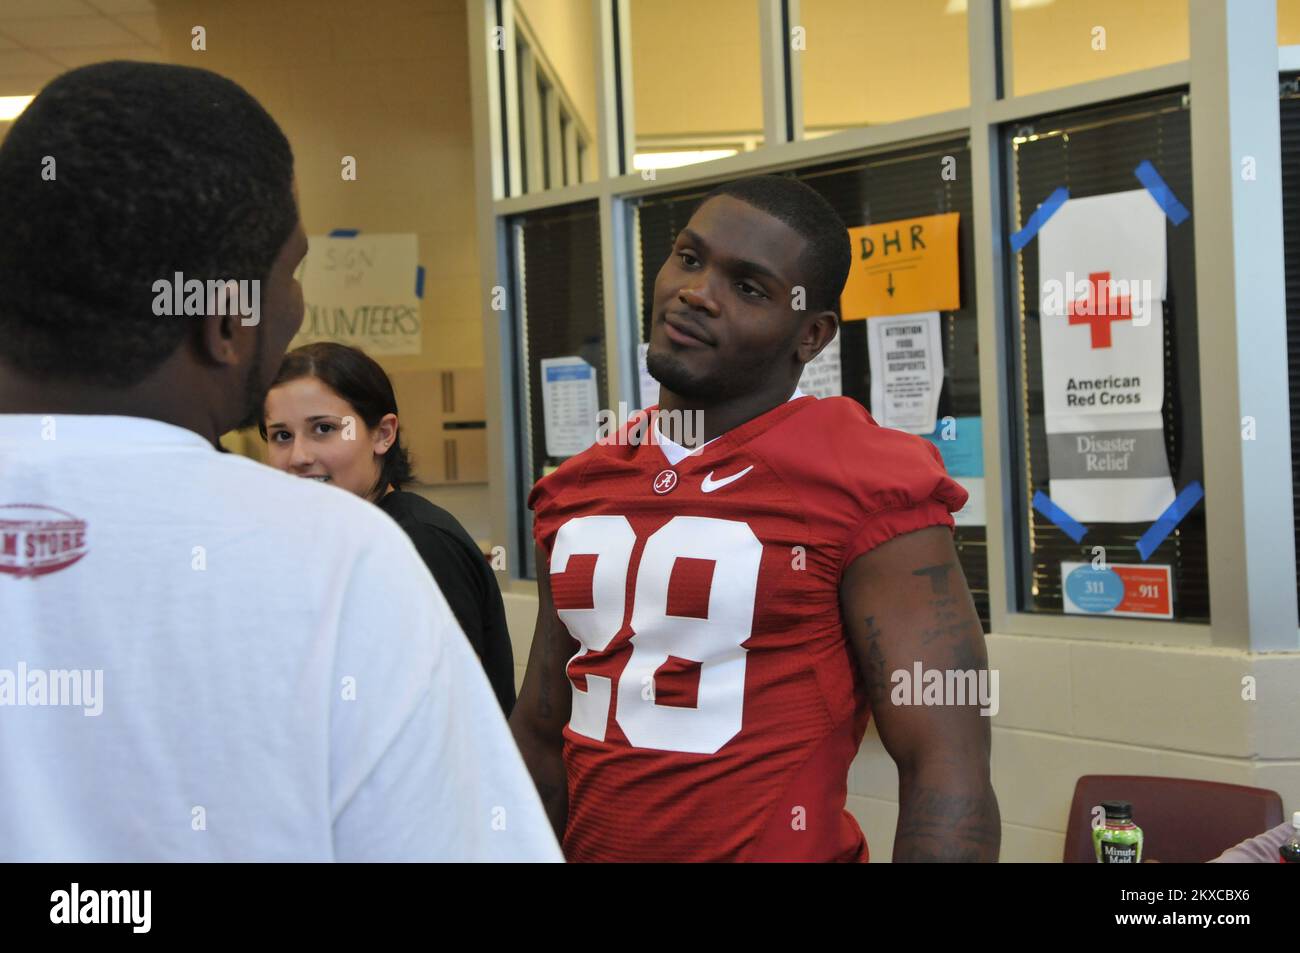 Tornado - Tuscaloosa, Ala. , May 6, 2011   University of Alabama Football All-American Javier Arenas chats with a fan at the Tuscaloosa Red Cross Shelter. Javier passed out FEMA registration flyers, signed autographs, and posed for pictures with fans to help raise the spirits of people who have lost nearly everything. FEMA Photo /Tim Burkitt. Alabama Severe Storms, Tornadoes, Straight-line Winds, and Flooding. Photographs Relating to Disasters and Emergency Management Programs, Activities, and Officials Stock Photo